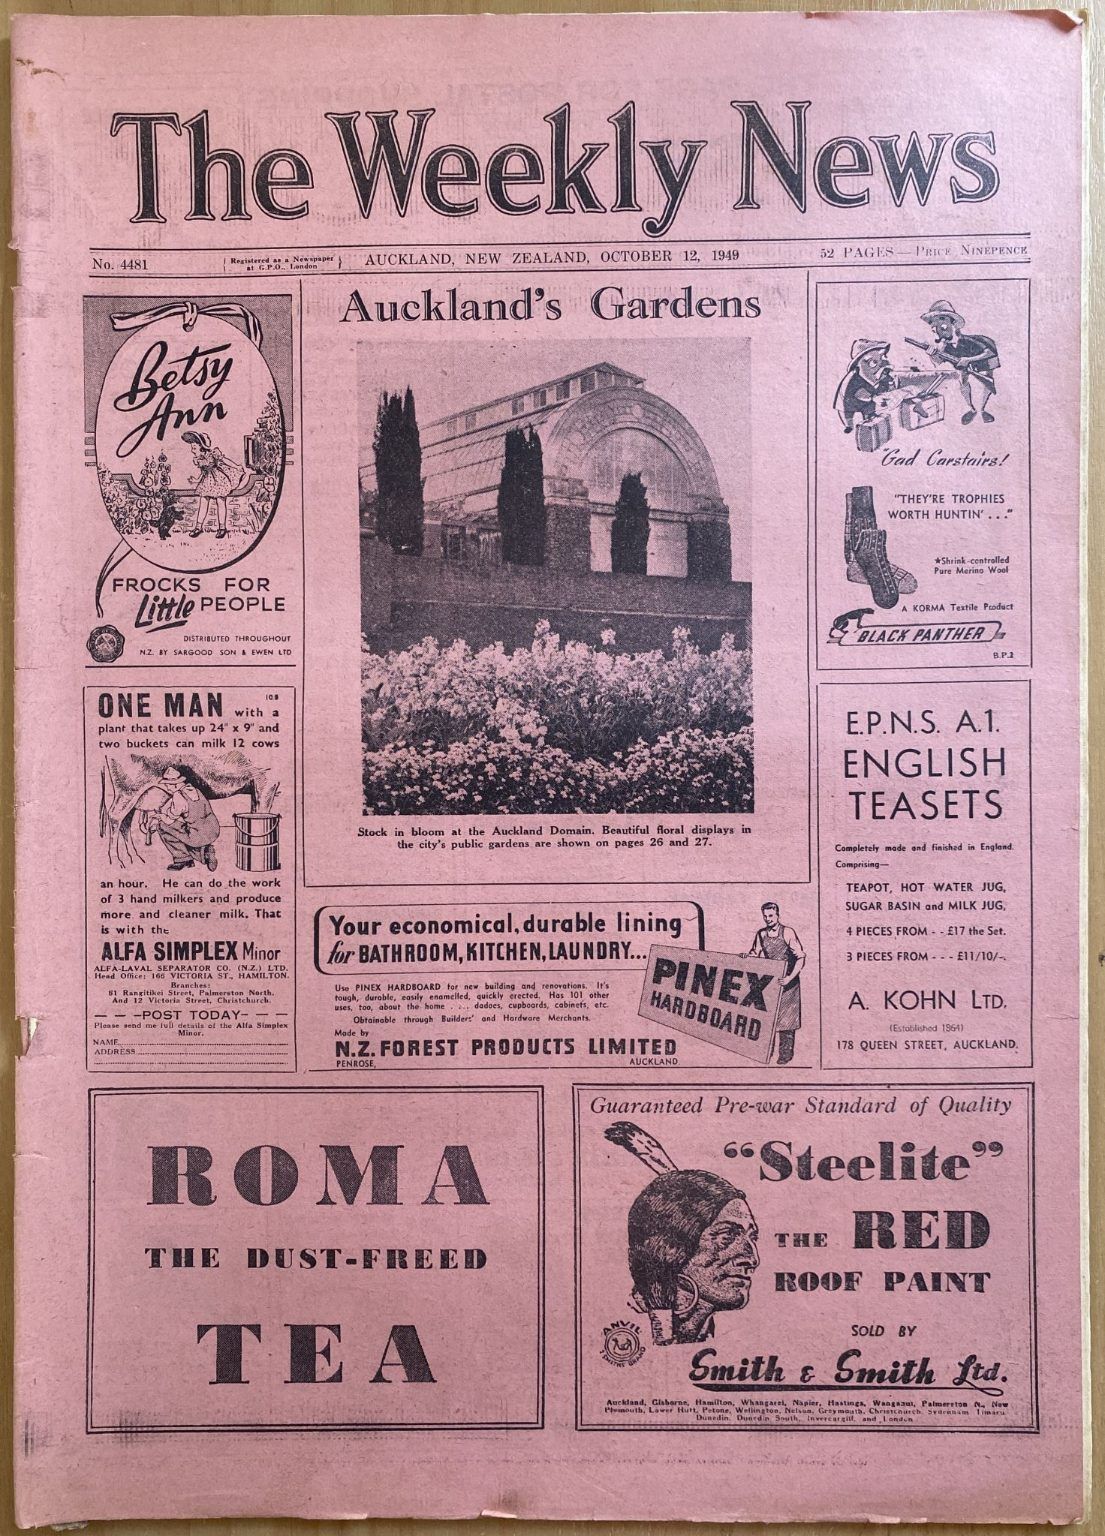 OLD NEWSPAPER: The Weekly News, No. 4481, 12 October 1949